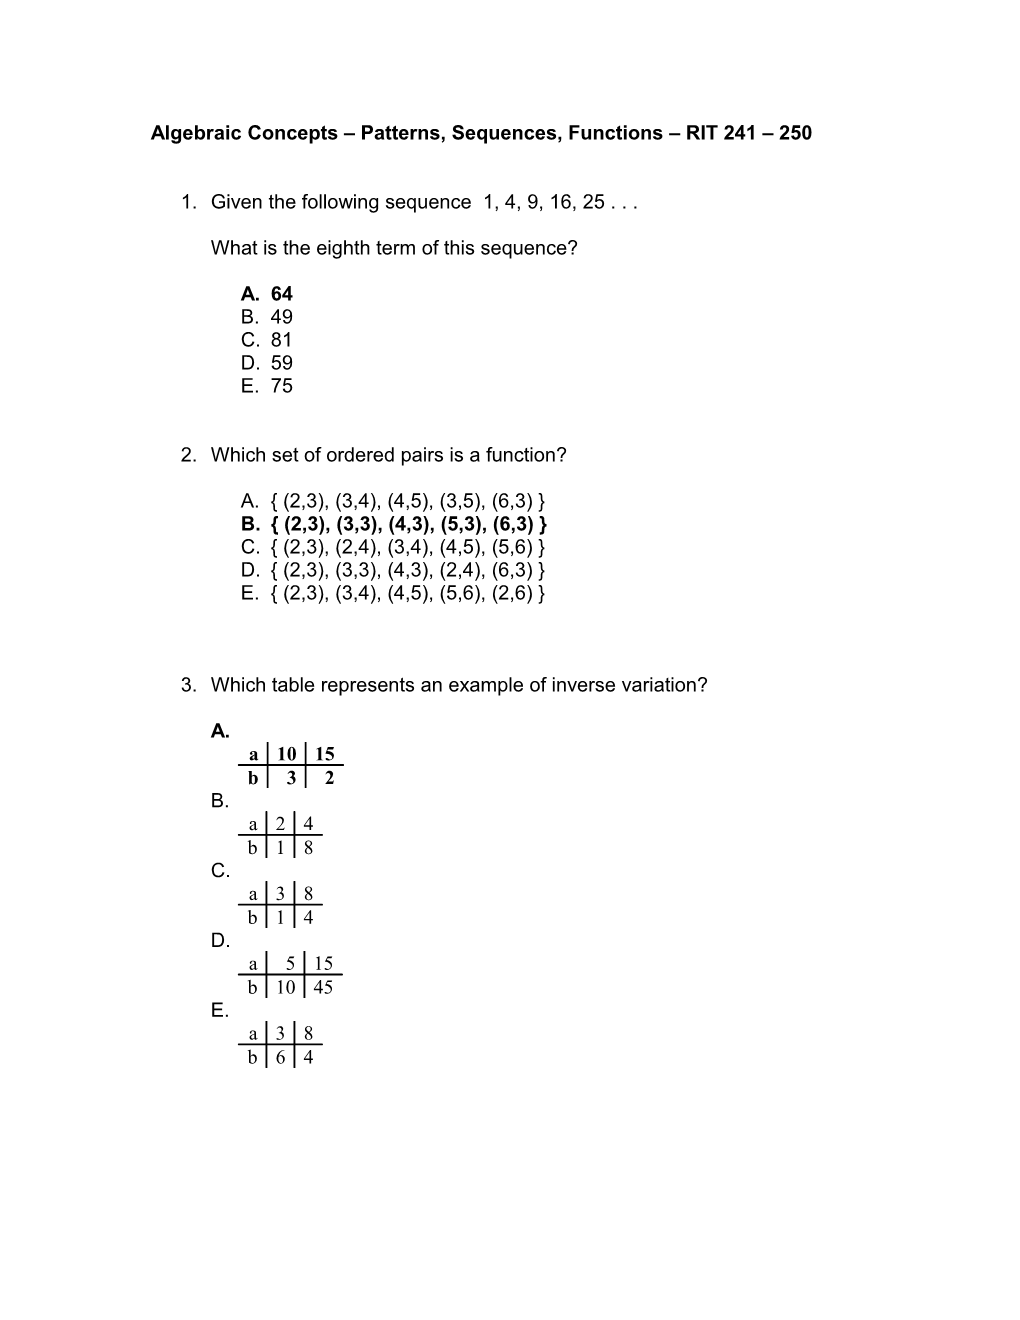 Algebraic Concepts Patterns, Sequences, Functions RIT 241 250